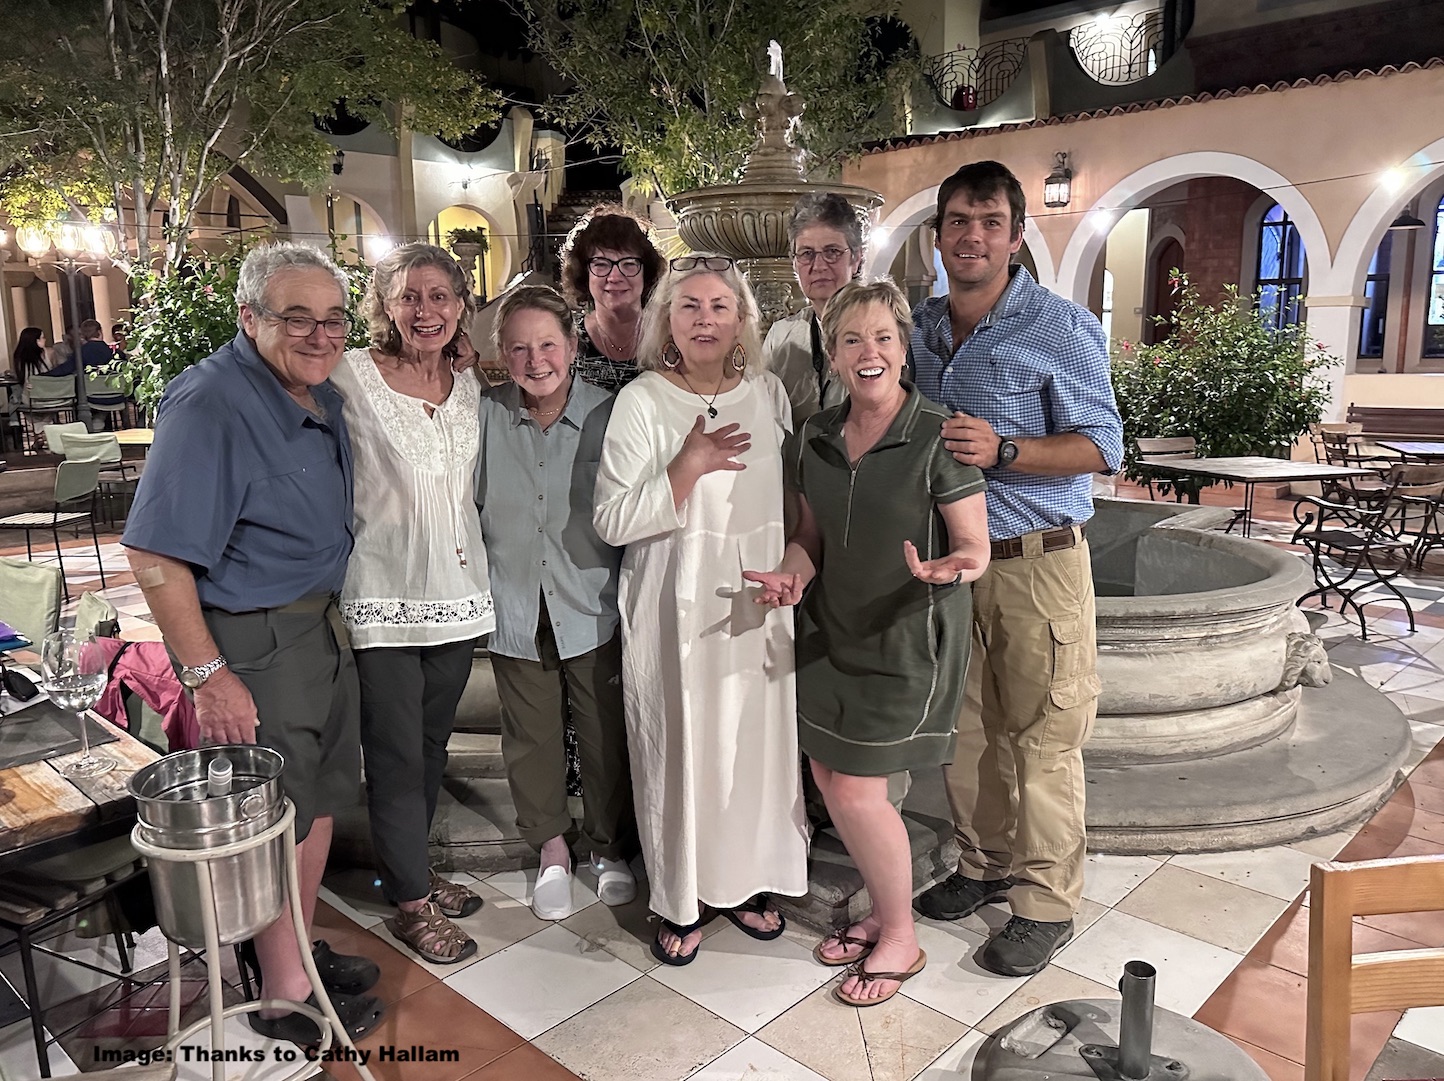 Farewell dinner in Windhoek, Namibia. Larry, Roberta, Tina, Kate, Noreen, Kris, Cathy, and Marc. 